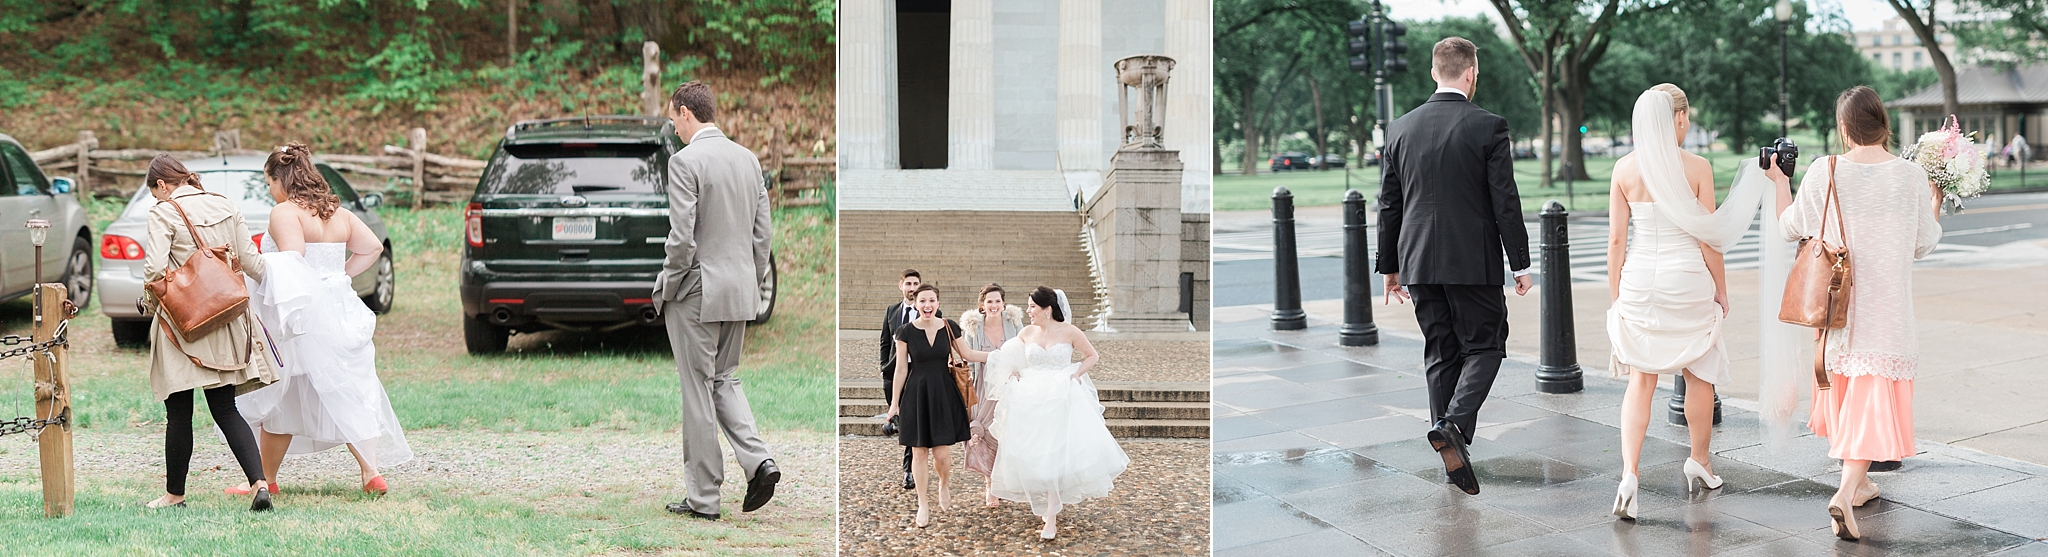 Go behind the scenes during the 2016 season with this Washington, DC wedding photographer to see all the fun that takes place on the big day!